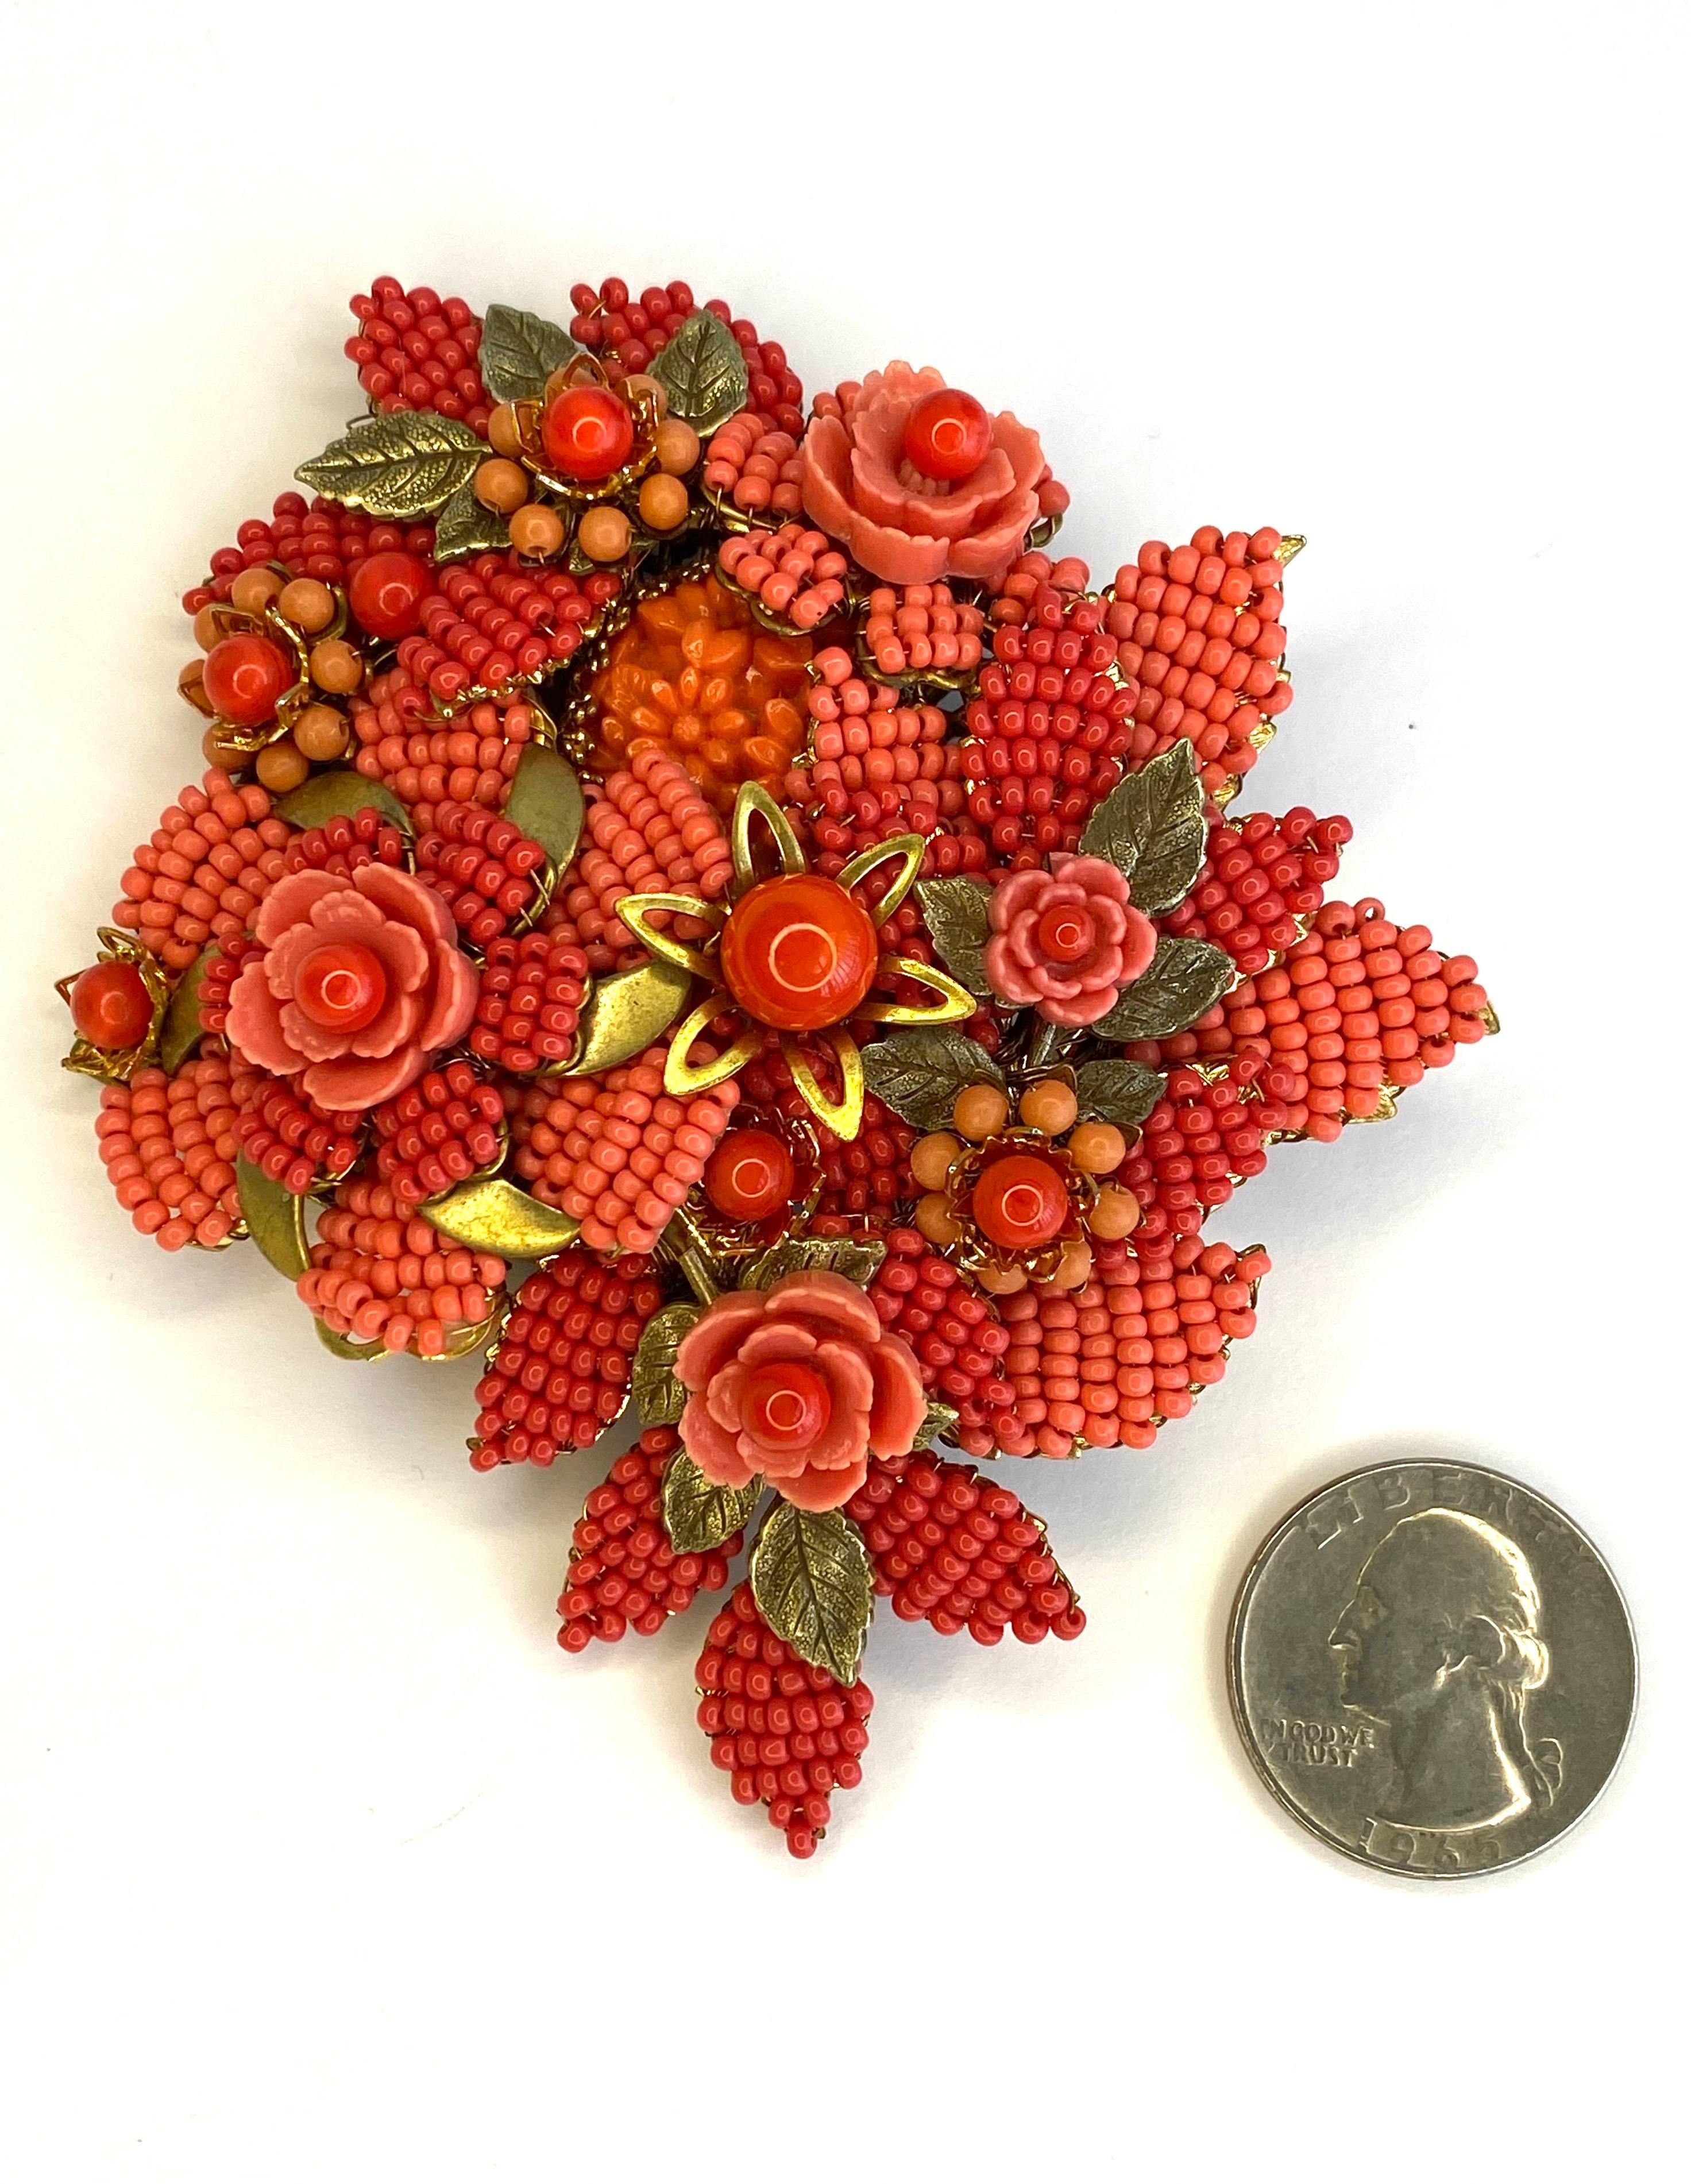 Lovely and large floral brooch by Stanley Hagler from the 1980s. Hand made of threaded coral glass beads on brass wire with four matching color resin flowers. The beads and flowers are strung onto a gold branch of leaves mounted on an antique gold